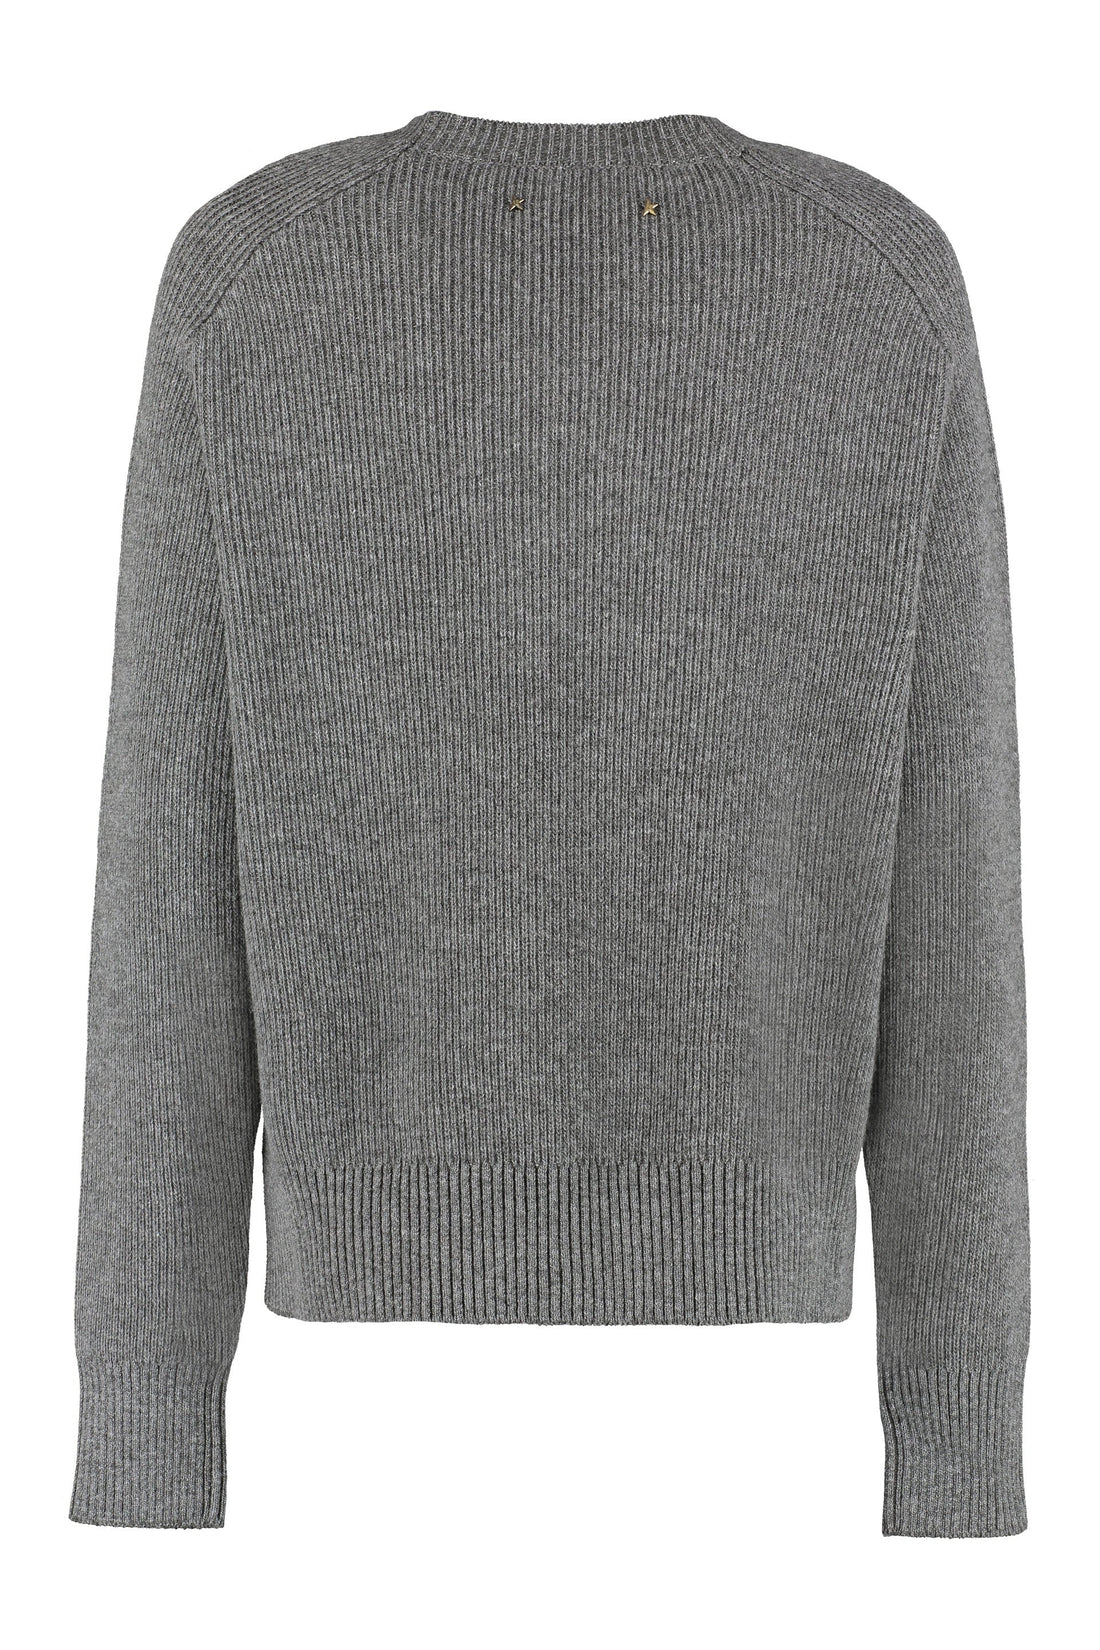 Golden Goose-OUTLET-SALE-Ribbed sweater-ARCHIVIST